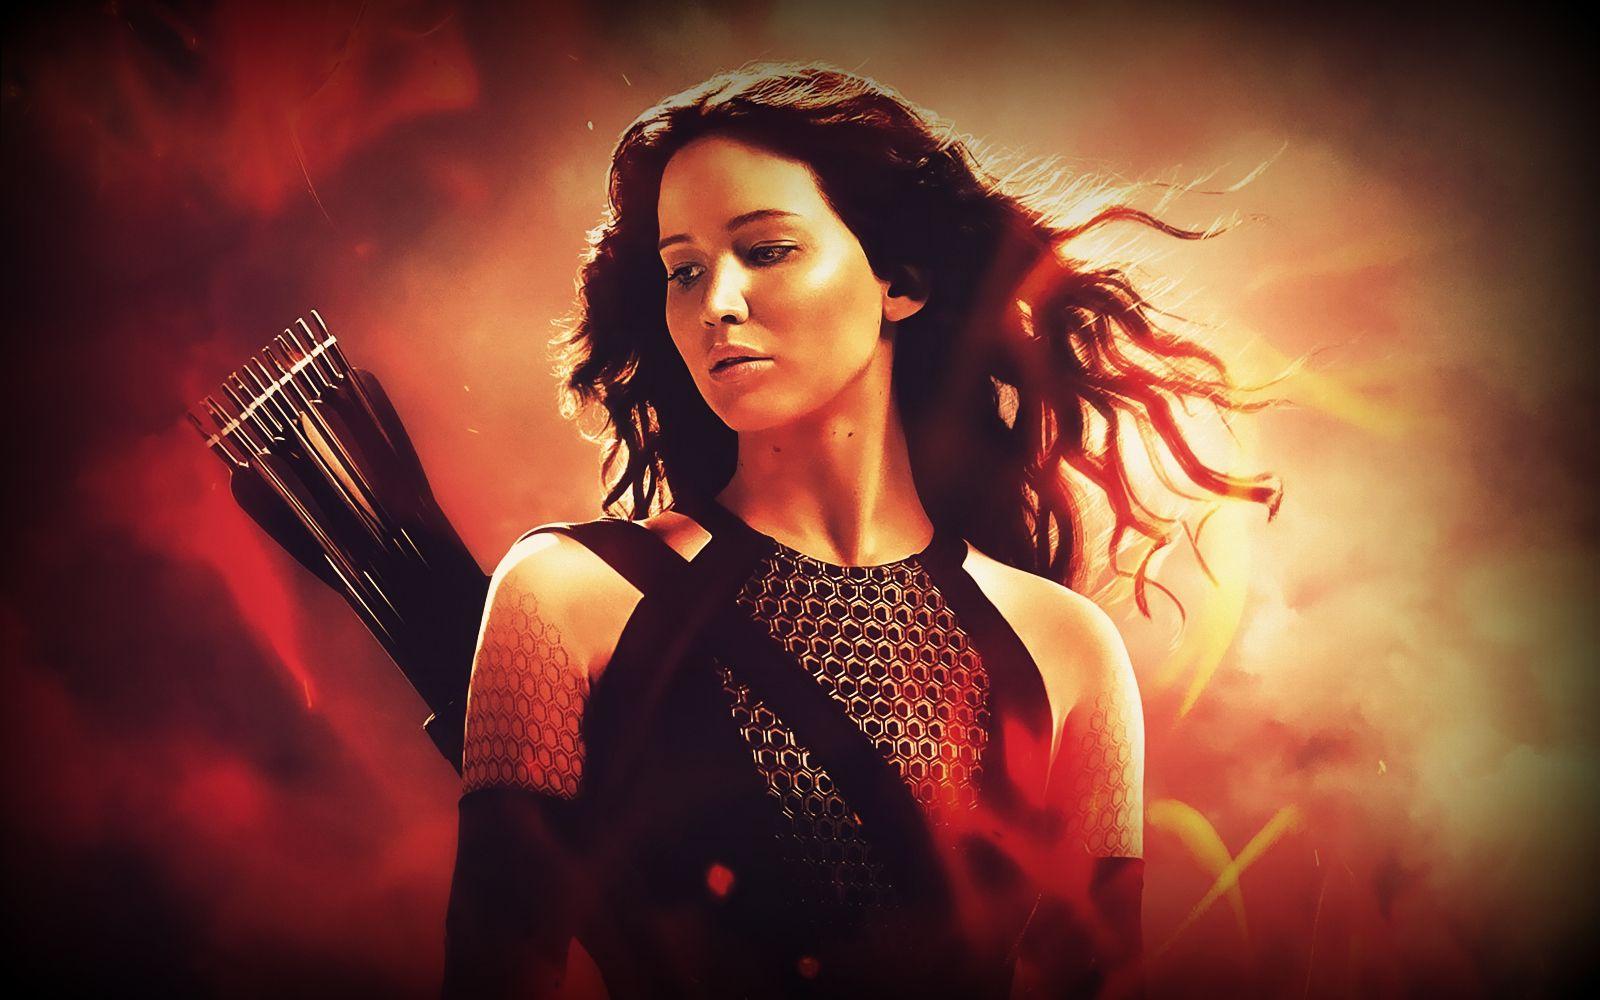 New wallpaper of Jennifer Lawrence as Katniss in Catching Fire